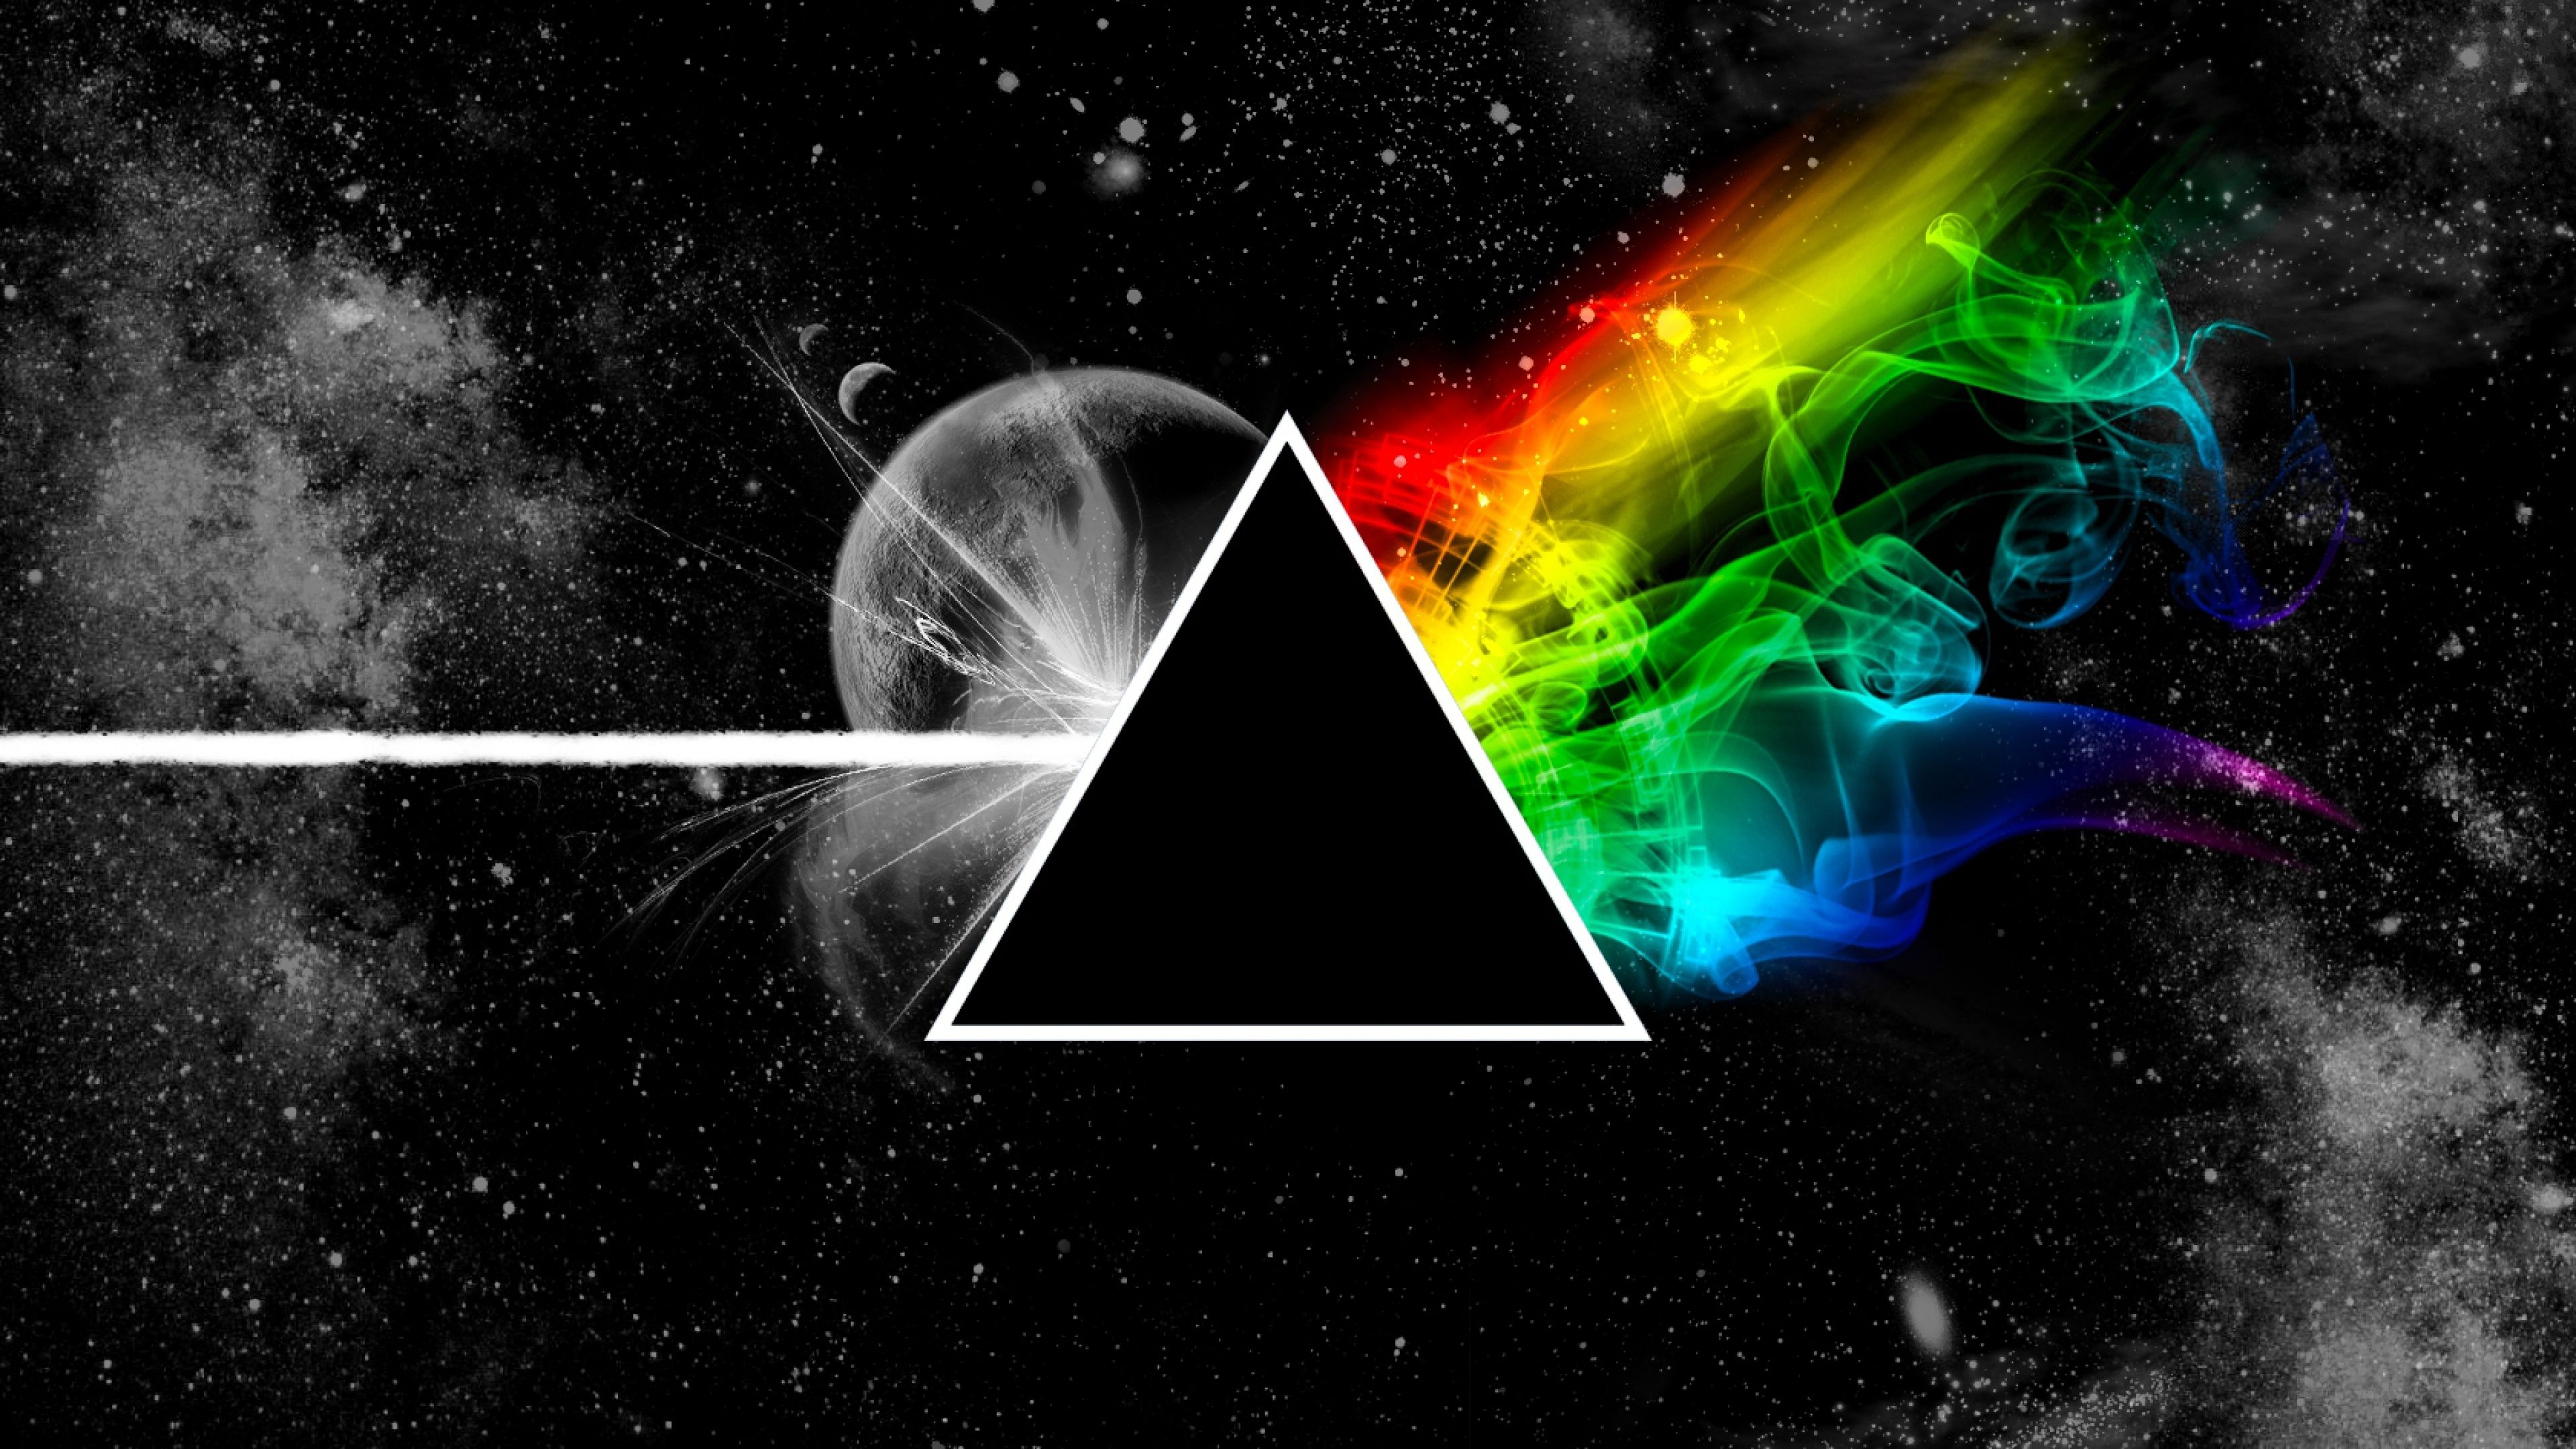 Ultra hd wallpapers hd wallpapers backgrounds of your choice pink floyd wallpaper pink floyd art pink floyd prism